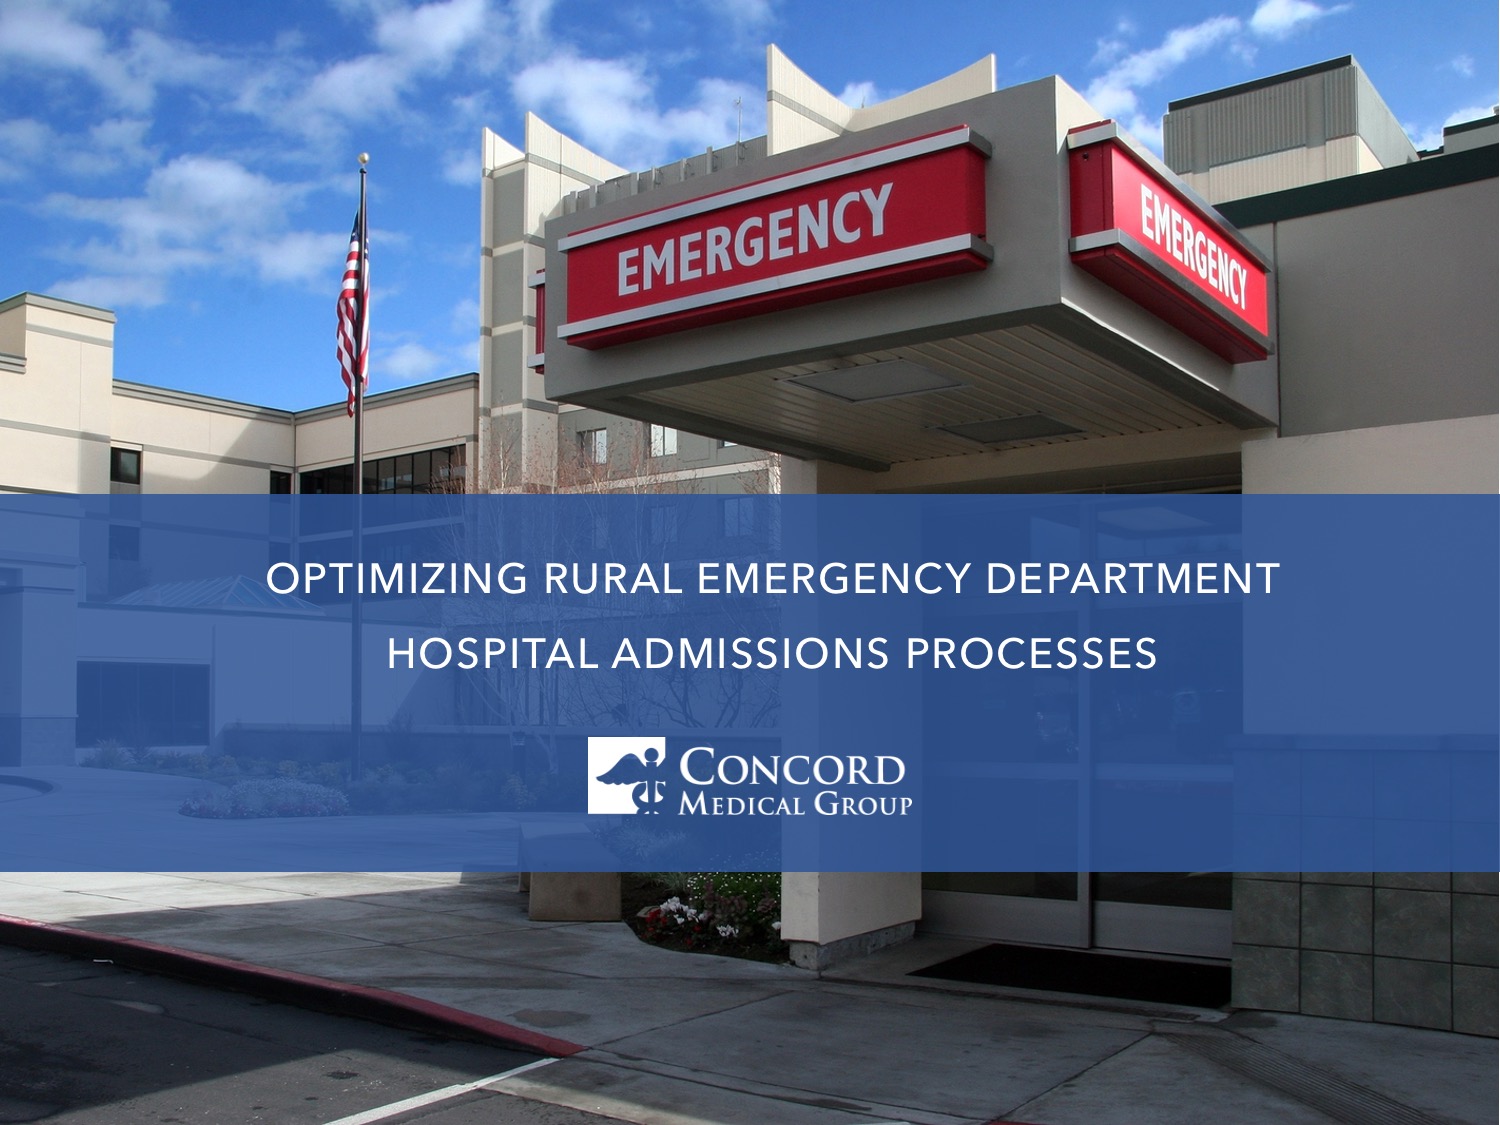 Optimizing Rural Emergency Department Hospital Admissions Processes